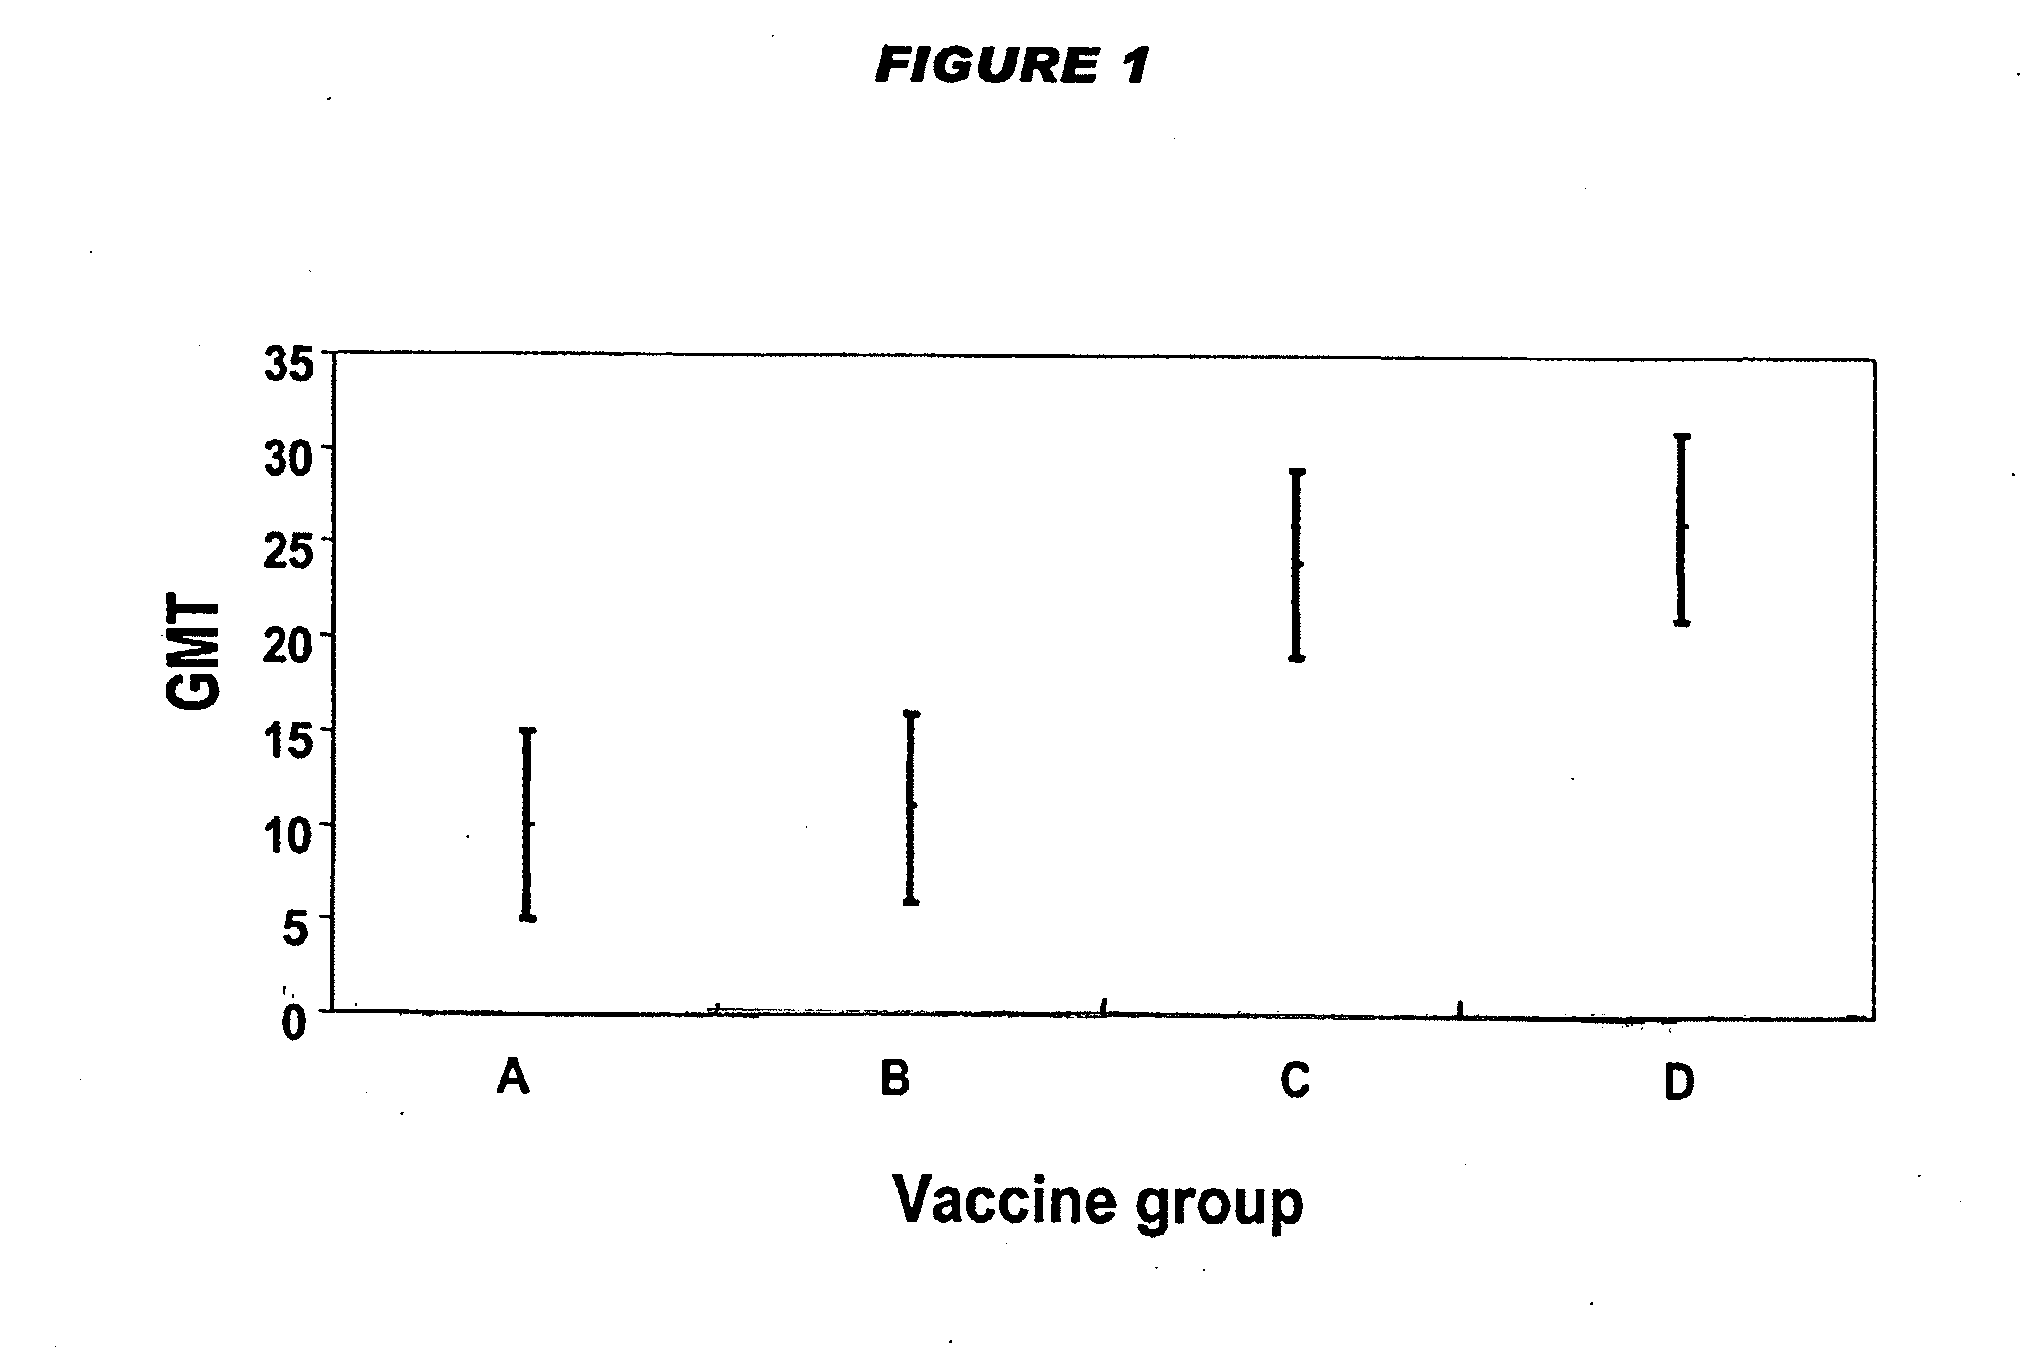 Combination vaccines with low does of hib conjugate